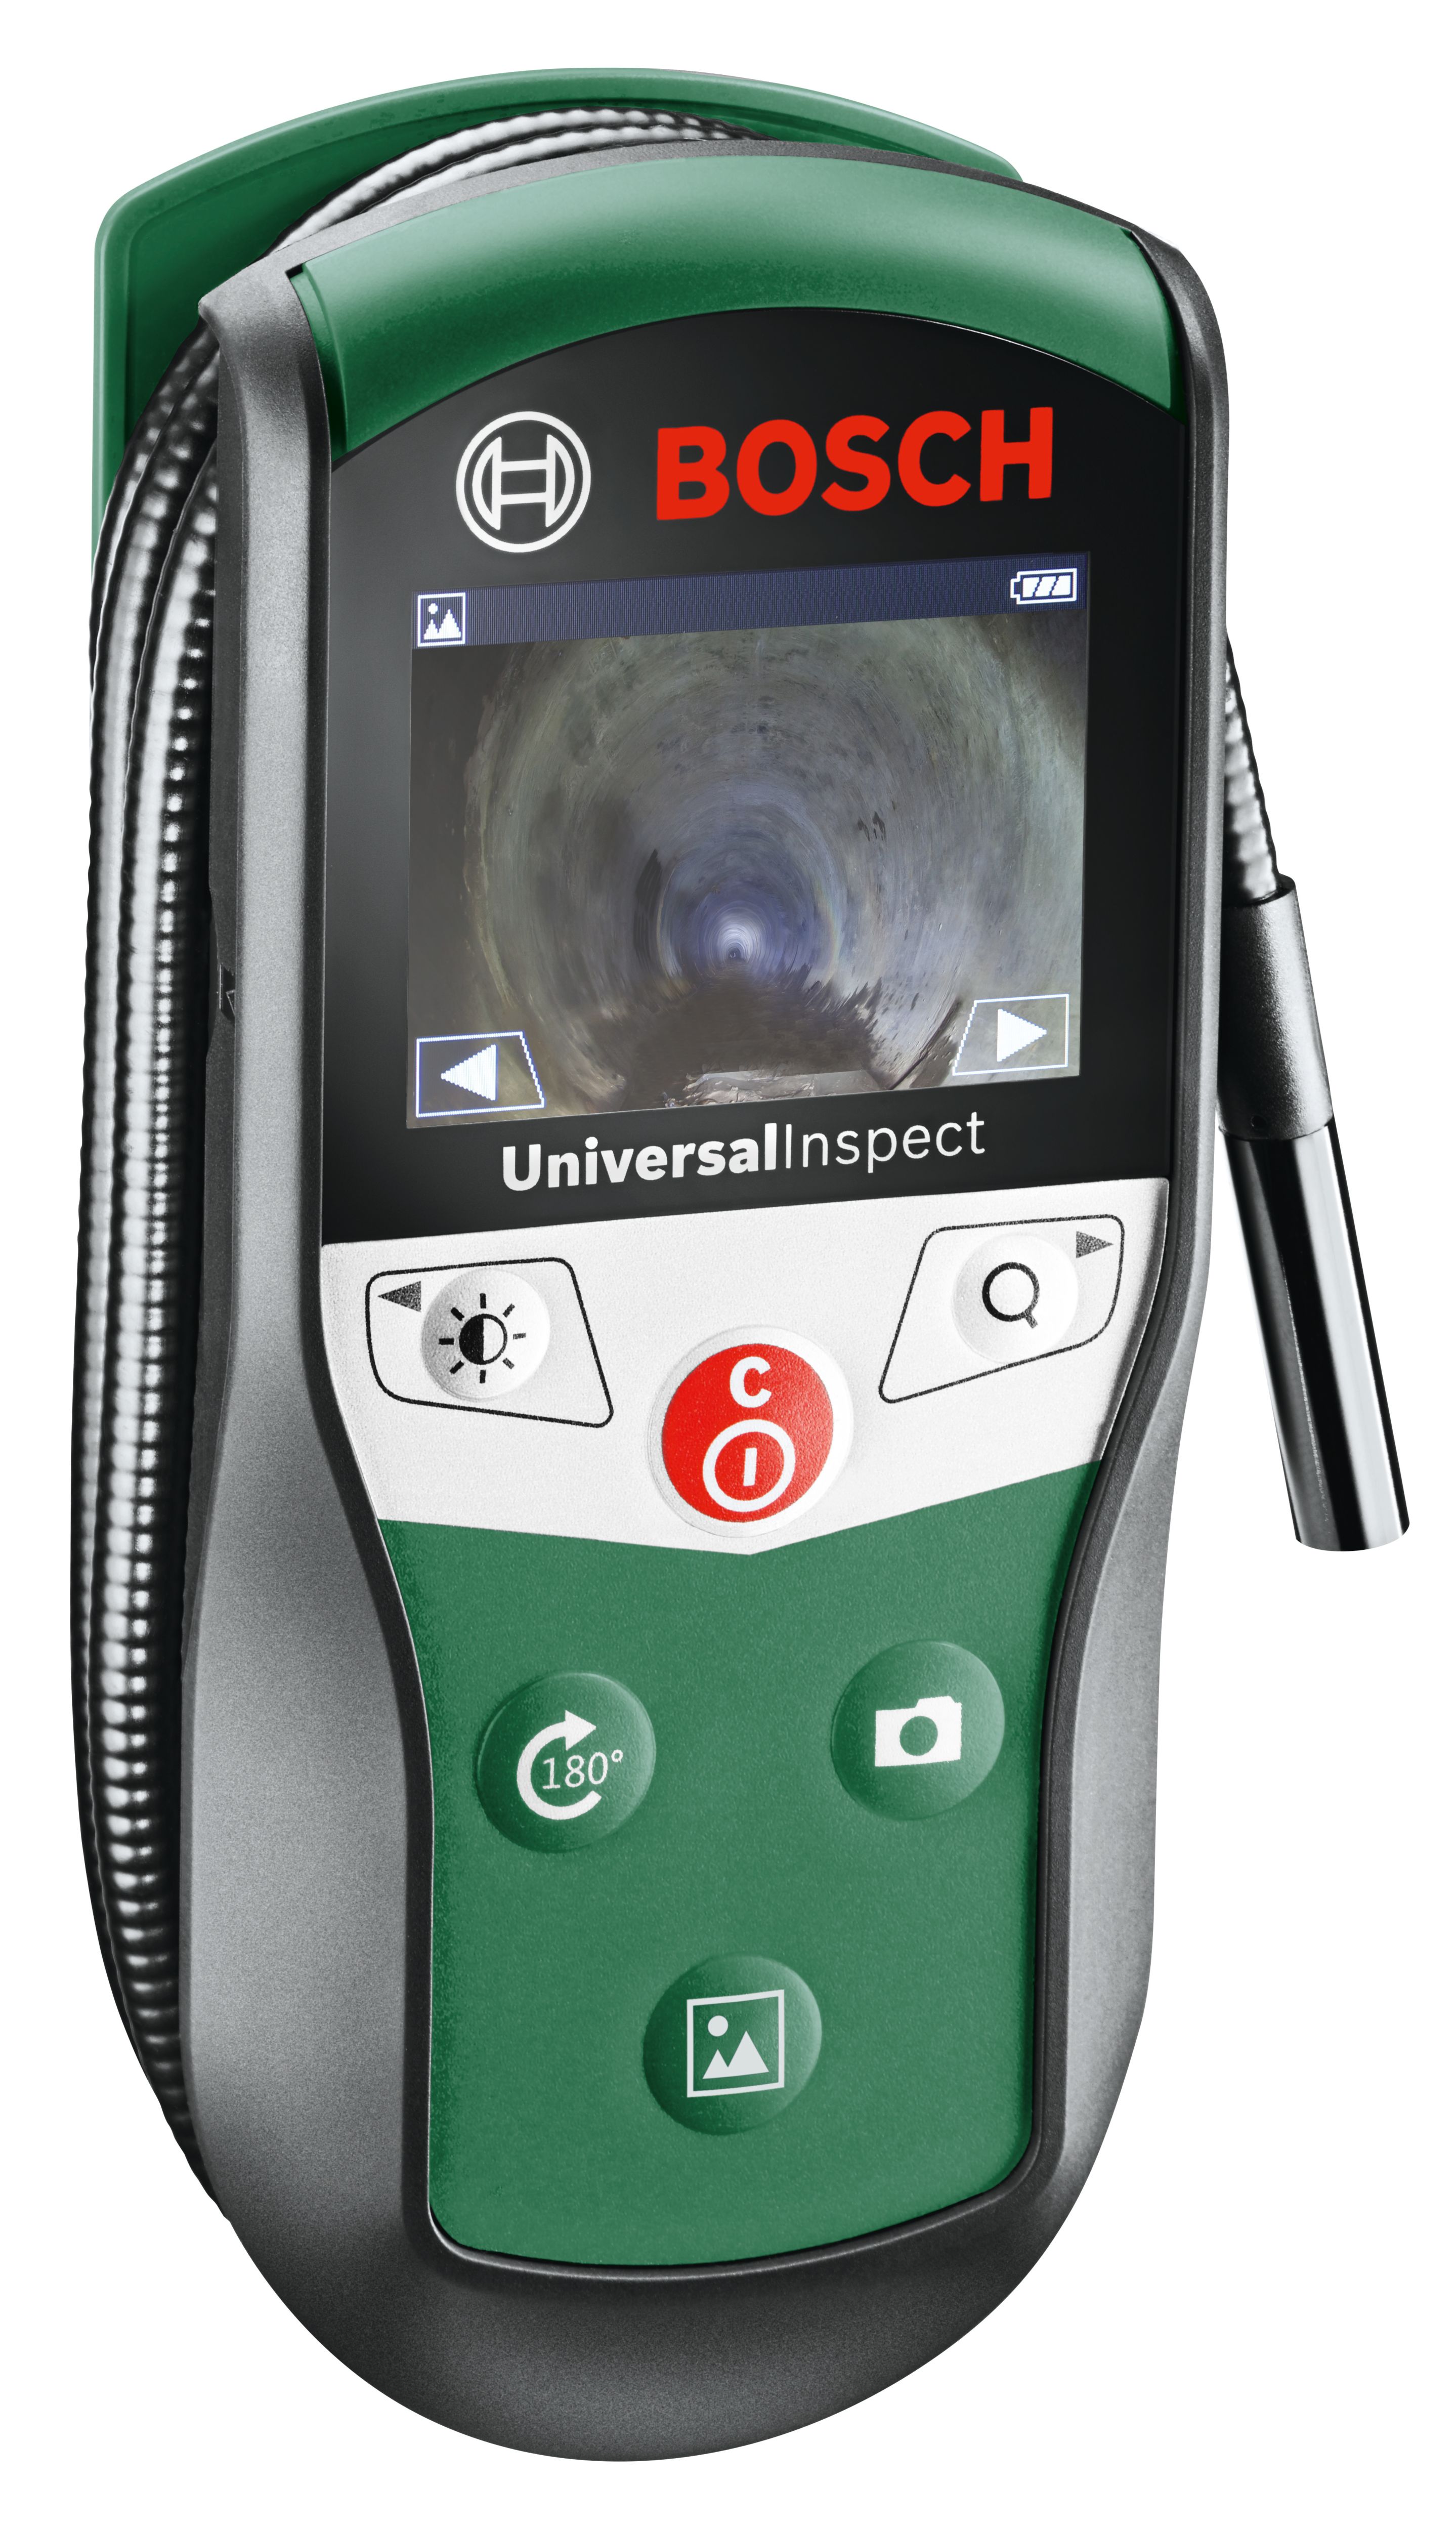 Bosch Universal Inspect Colour LCD Screen Inspection Camera - 2.3in